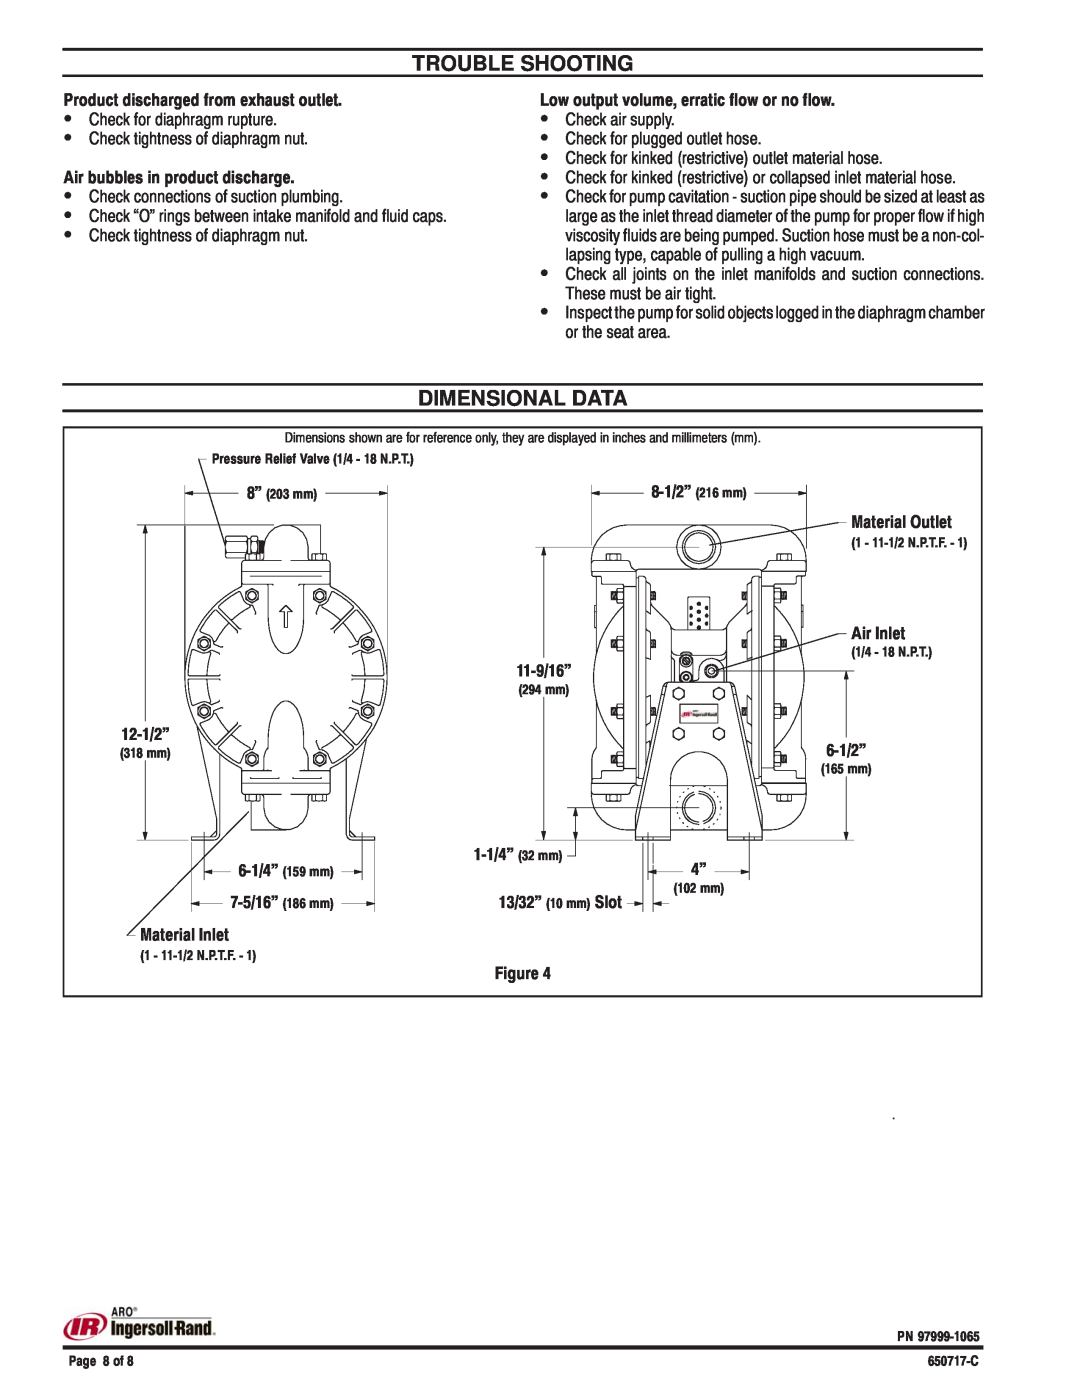 Ingersoll-Rand 650717-C manual Trouble Shooting, Dimensional Data 